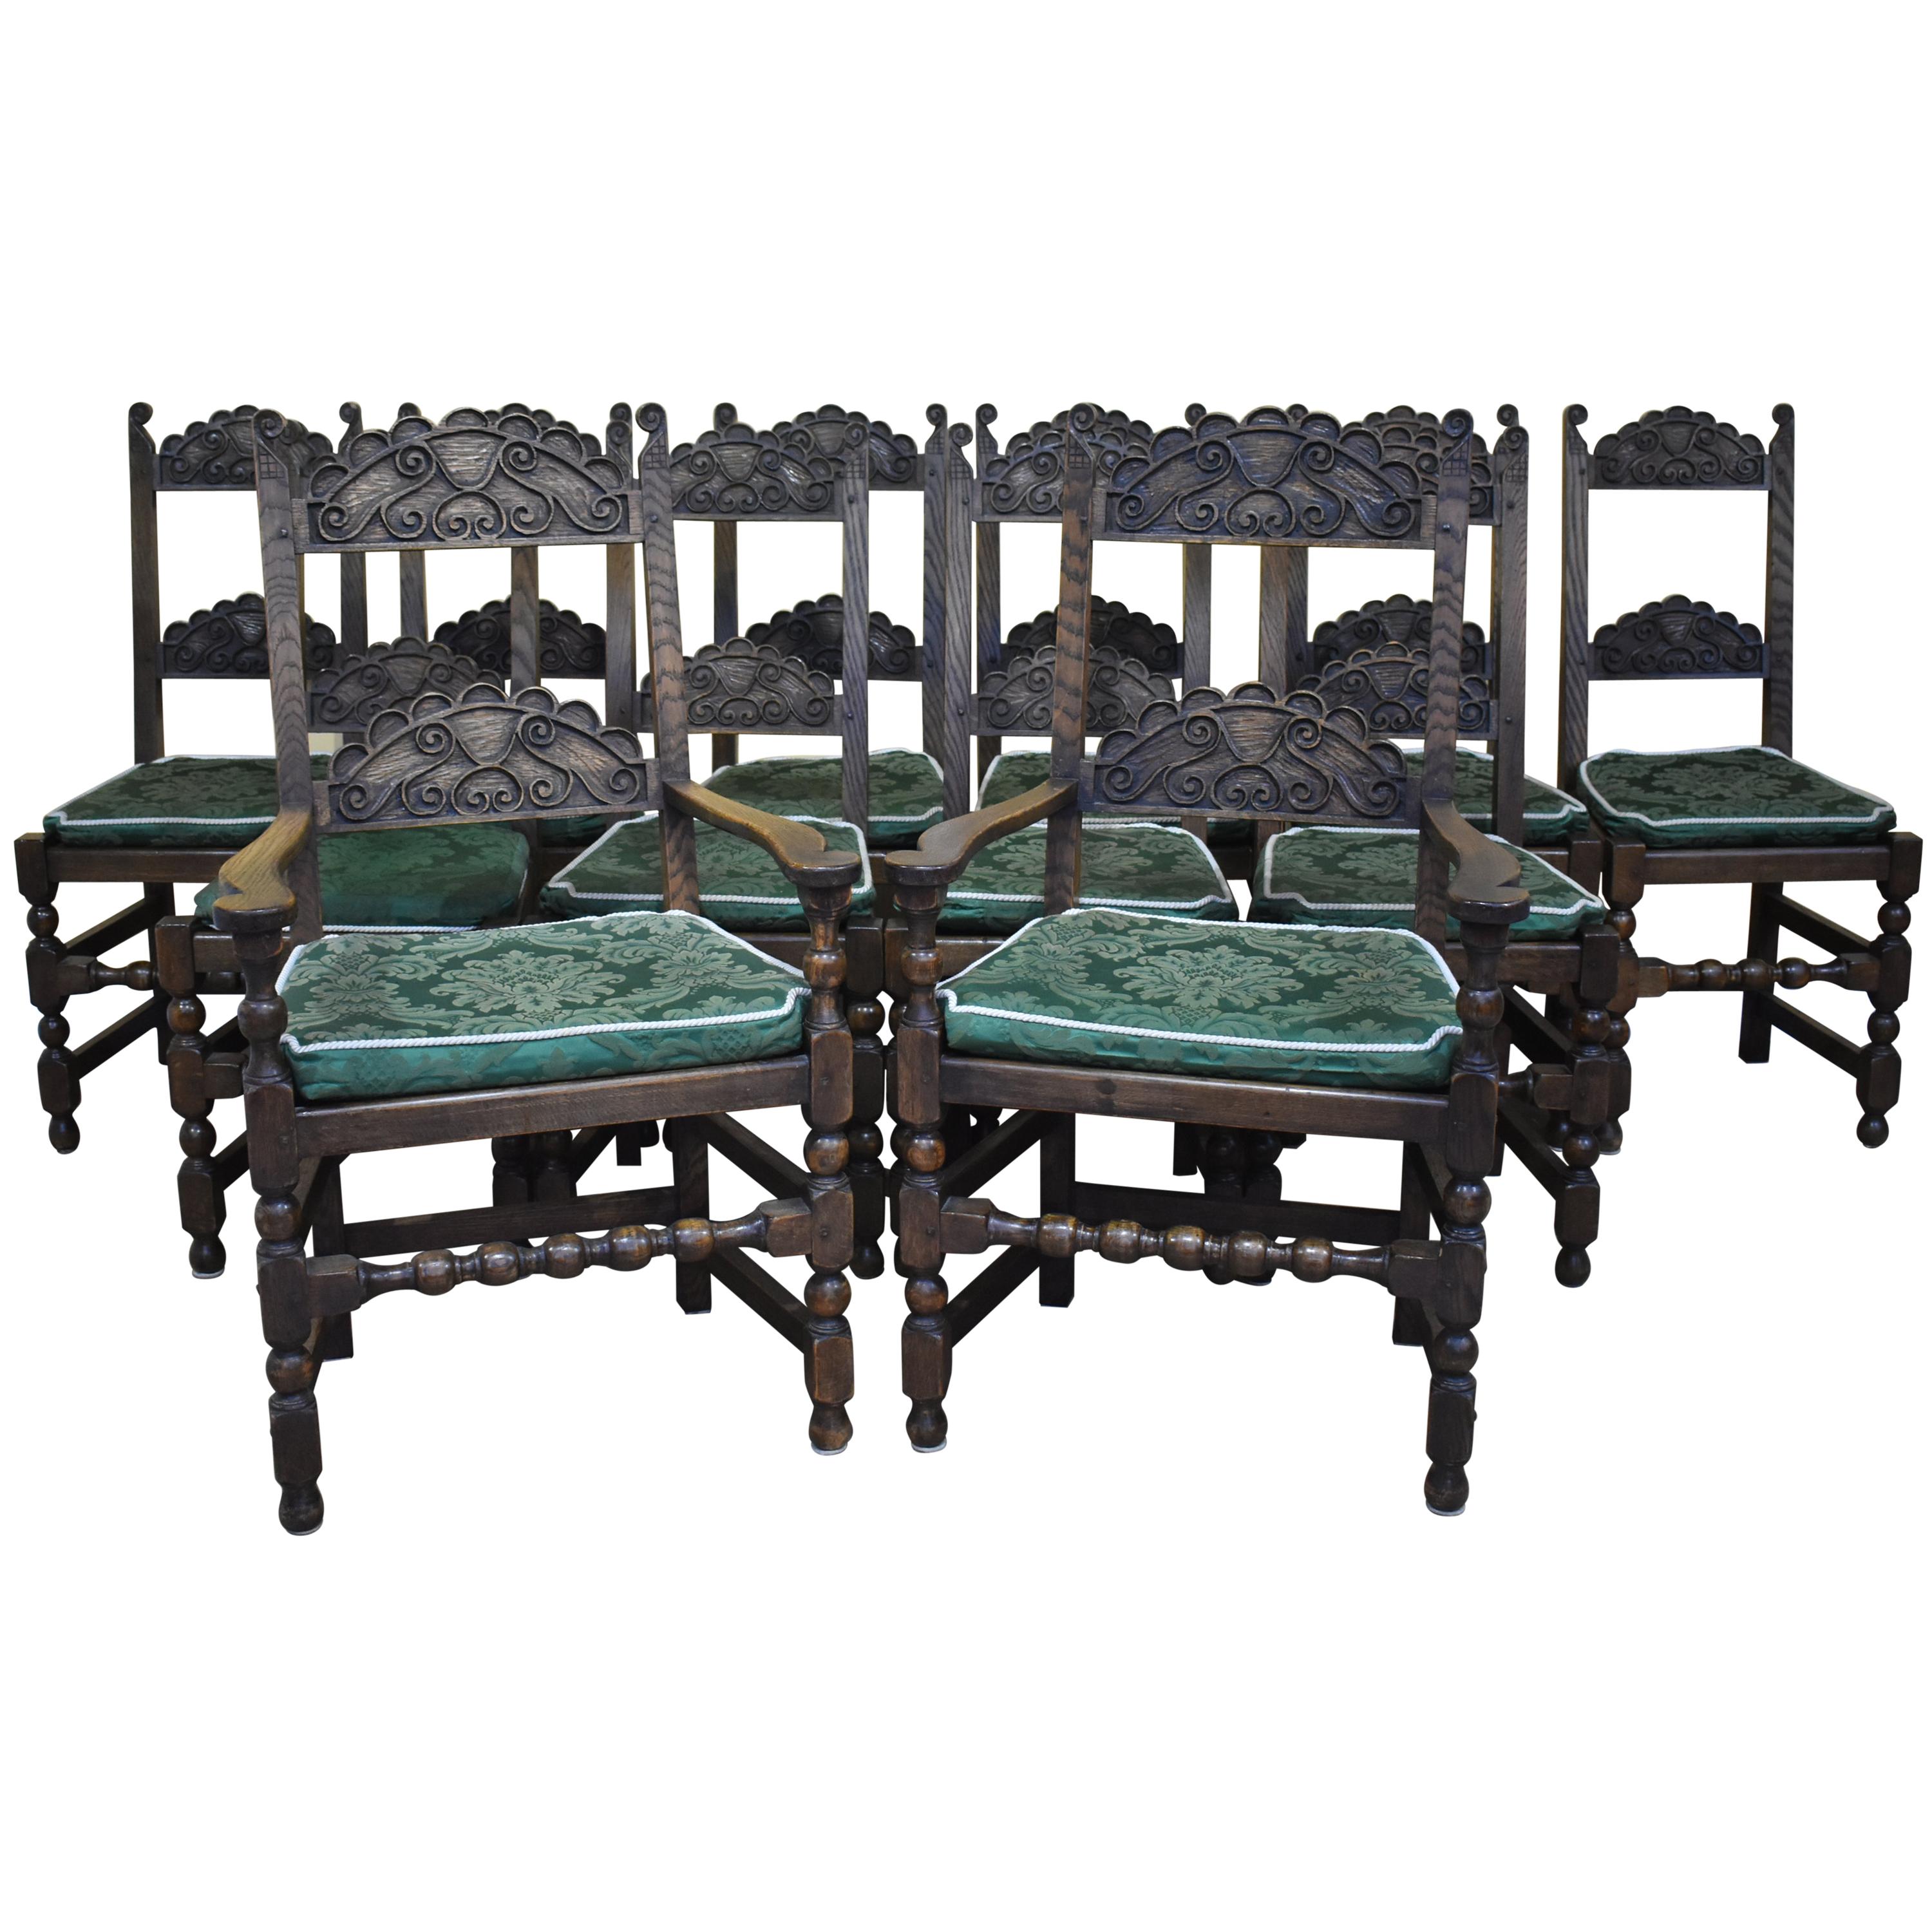 Set of 12 Carved Oak Dining Chairs